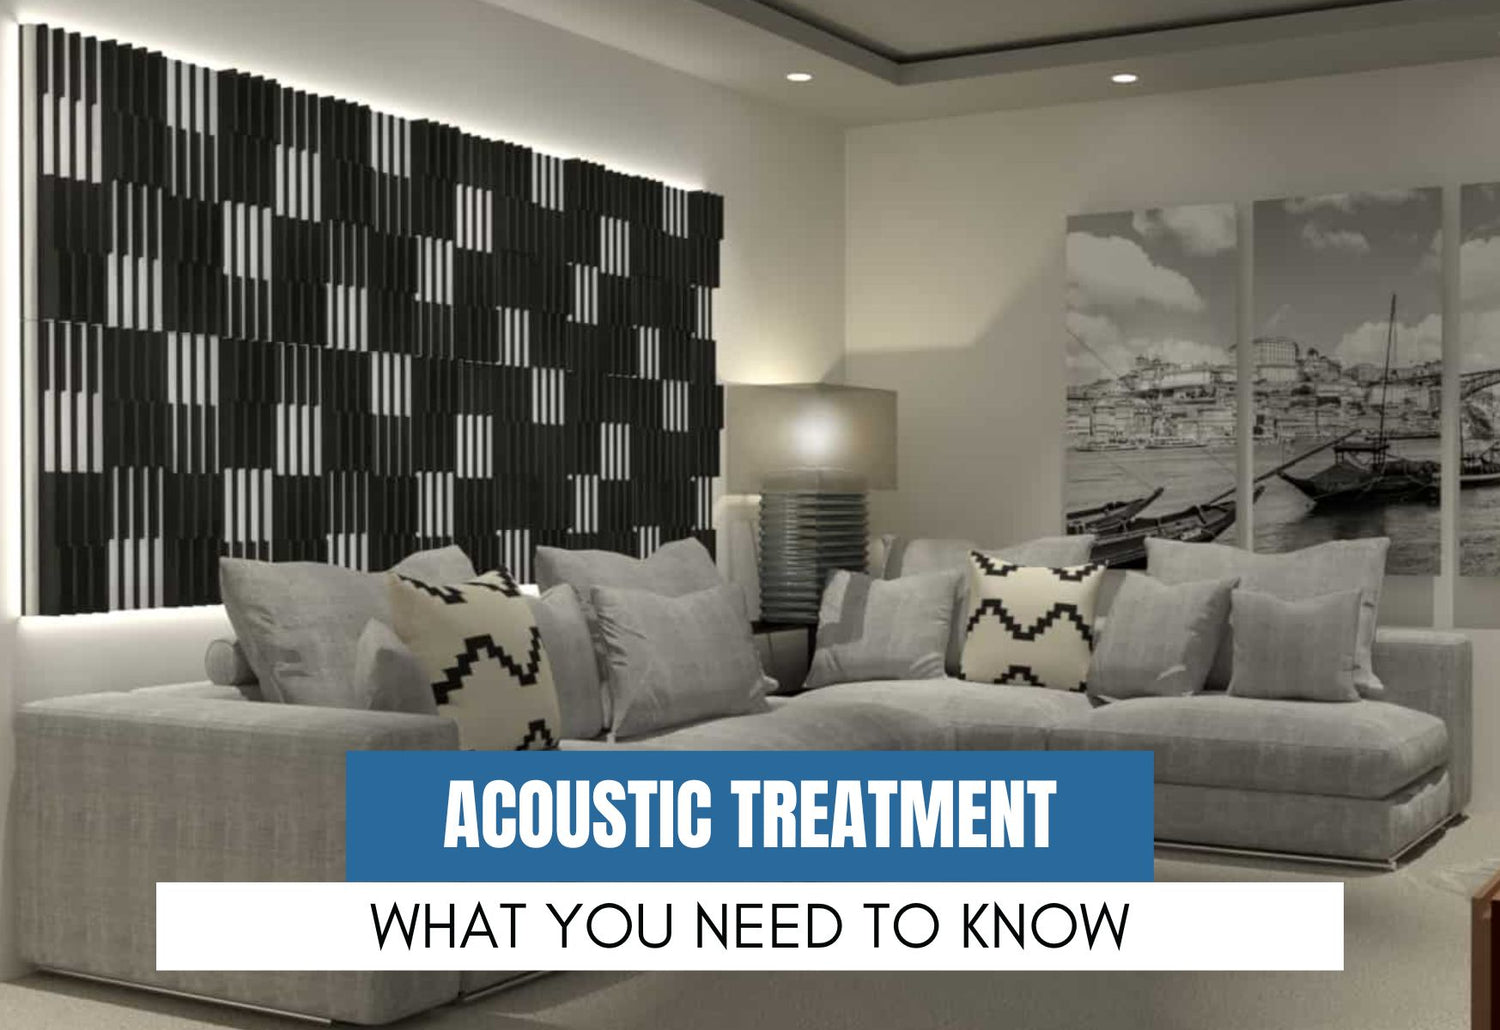 Acoustic Treatment - What You Need to Know